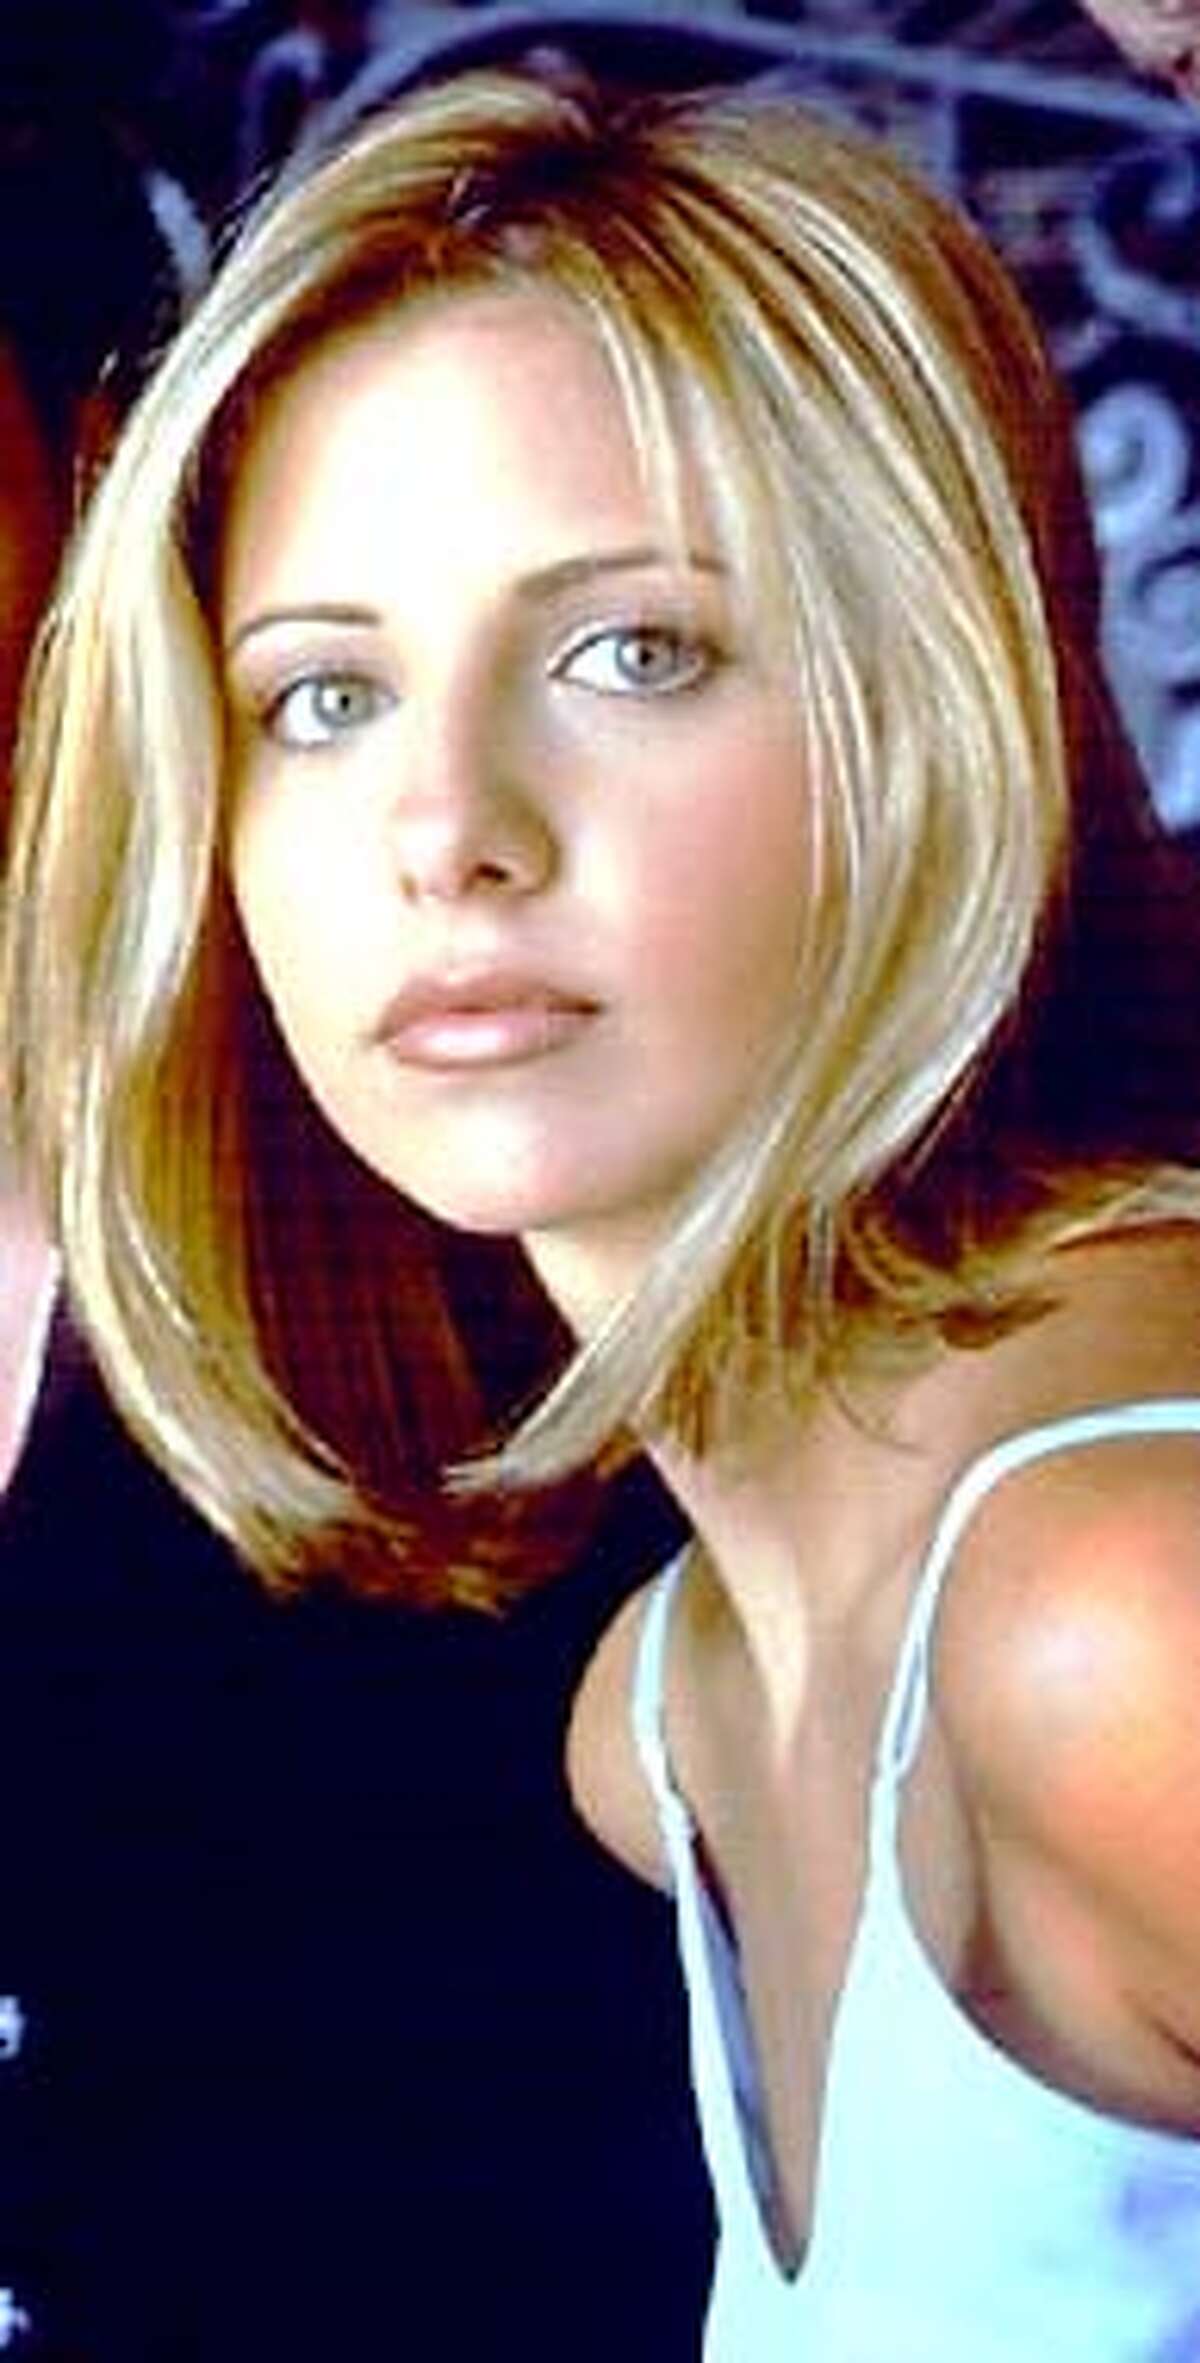 RECORD BREAKING "NEW TUESDAY" DEBUT ON THE WEB -- The winning combination of "Buffy the Vampire Slayer" (Tuesdays at 8 p.m. ET) and the critically acclaimed drama "Dawson's Creek" (Tuesdays at 9 p.m. ET) propelled The WB to an all-time high with a 5.0 rating/8 share. (Left photo) David Boreanaz, Sarah Michelle Gellar ("Buffy the Vampire Slayer") (Right photo) Joshua Jackson, Katie Holmes, James Van Der Beek and Michelle Williams ("Dawson's Creek" cast) (Business Wire photo) ALSO RAN 10/02/2001